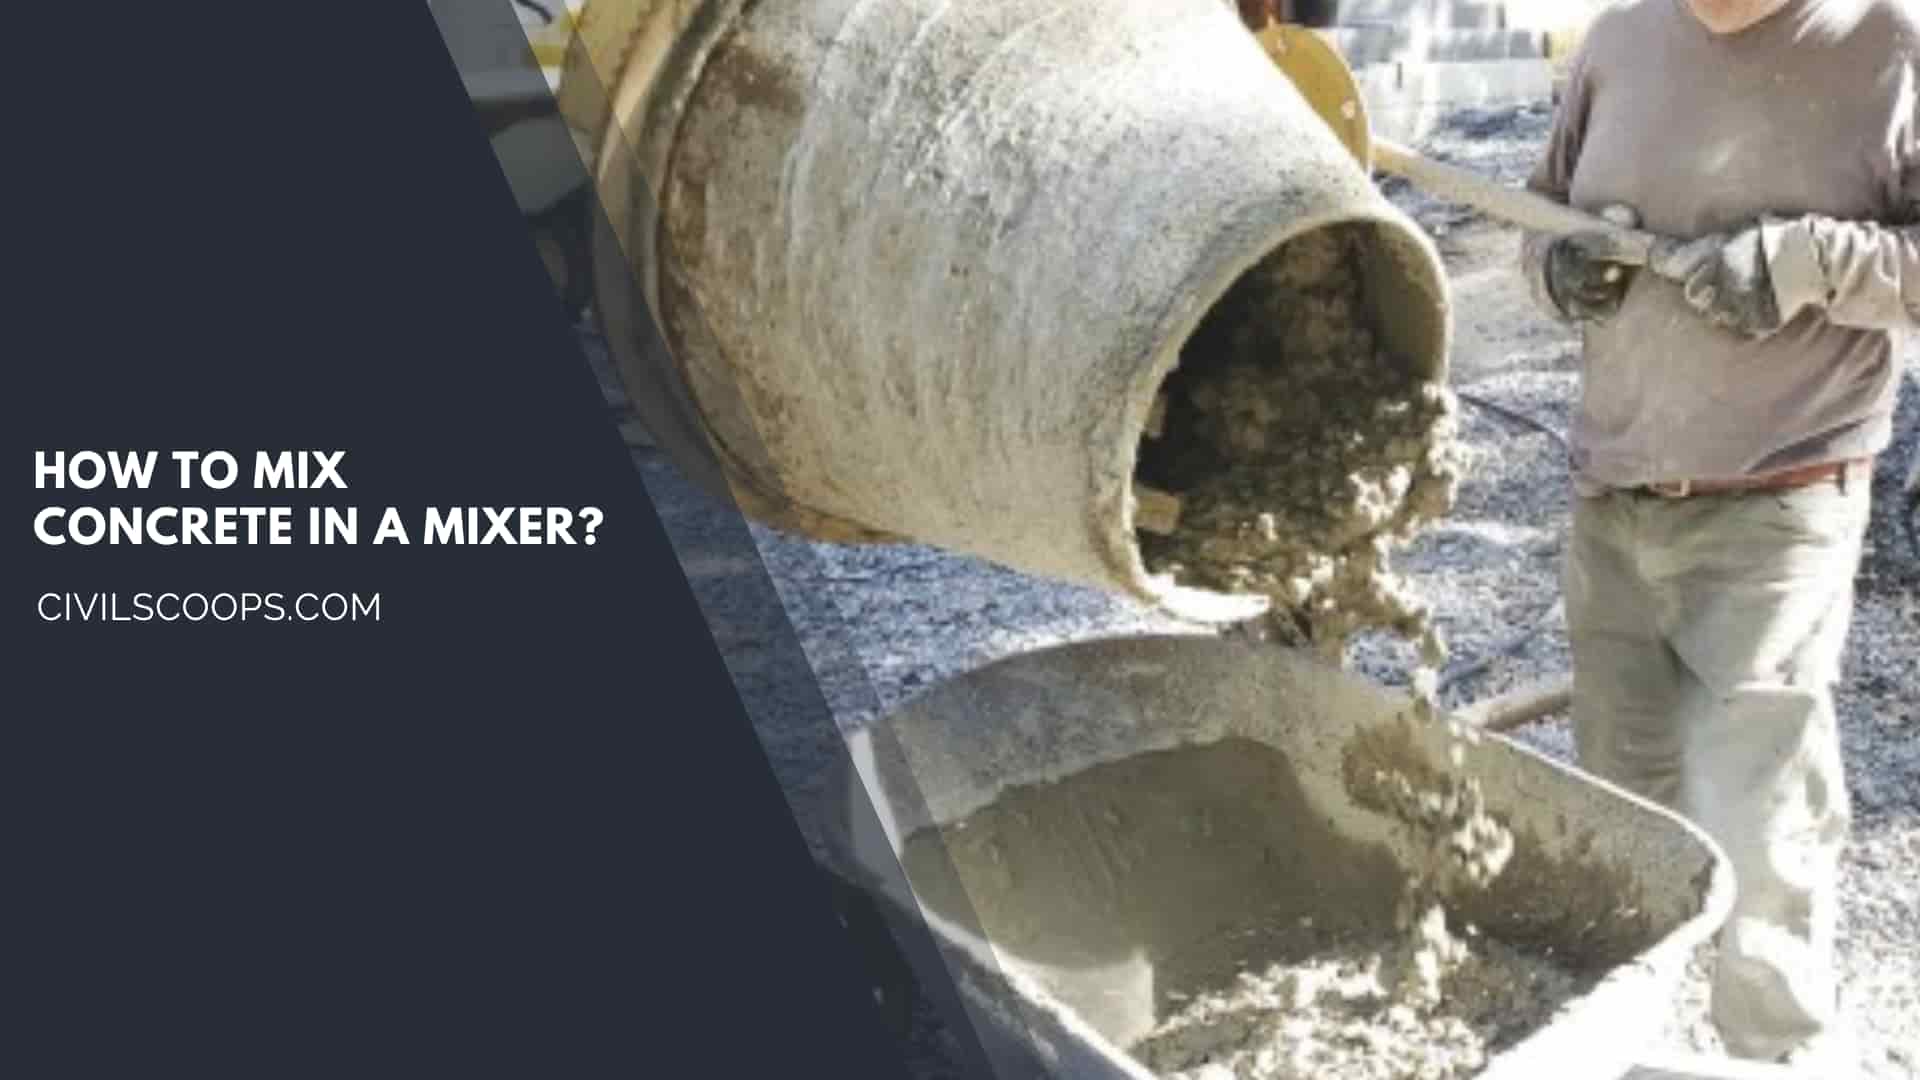 How to Mix Concrete in a Mixer